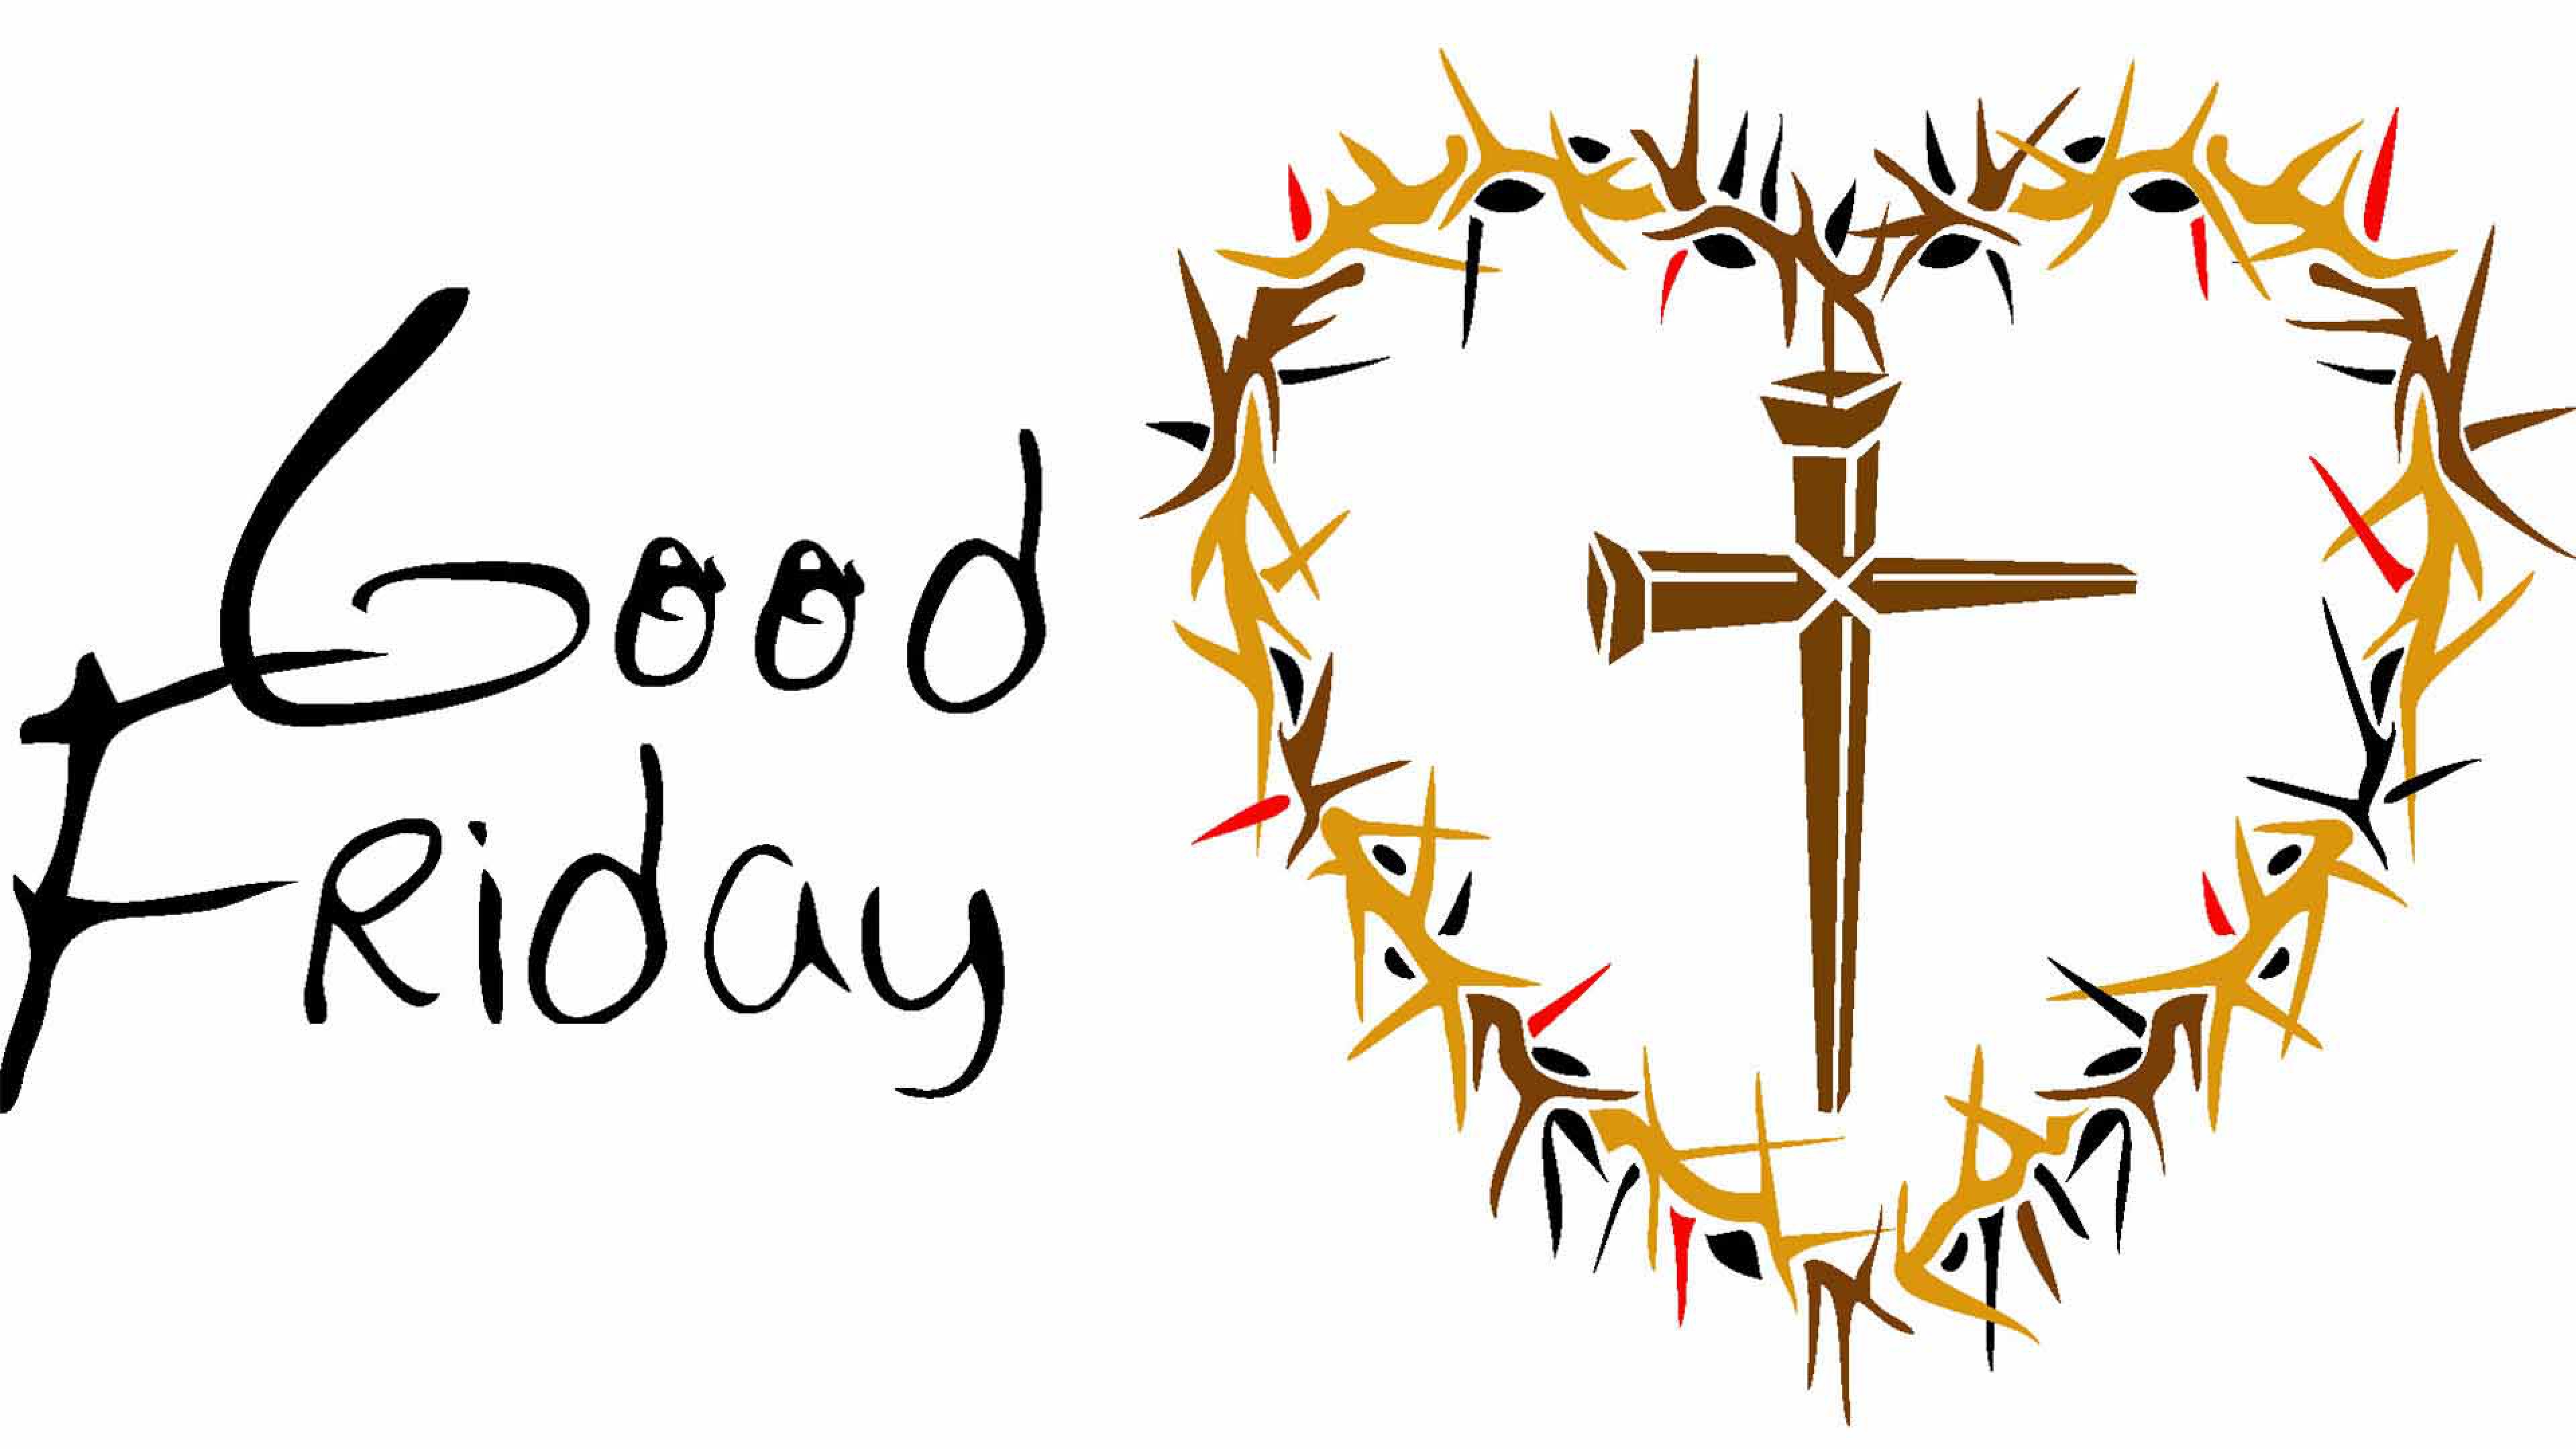 Download Wallpaper 3840x2160 Good friday 2015, Holy thursday